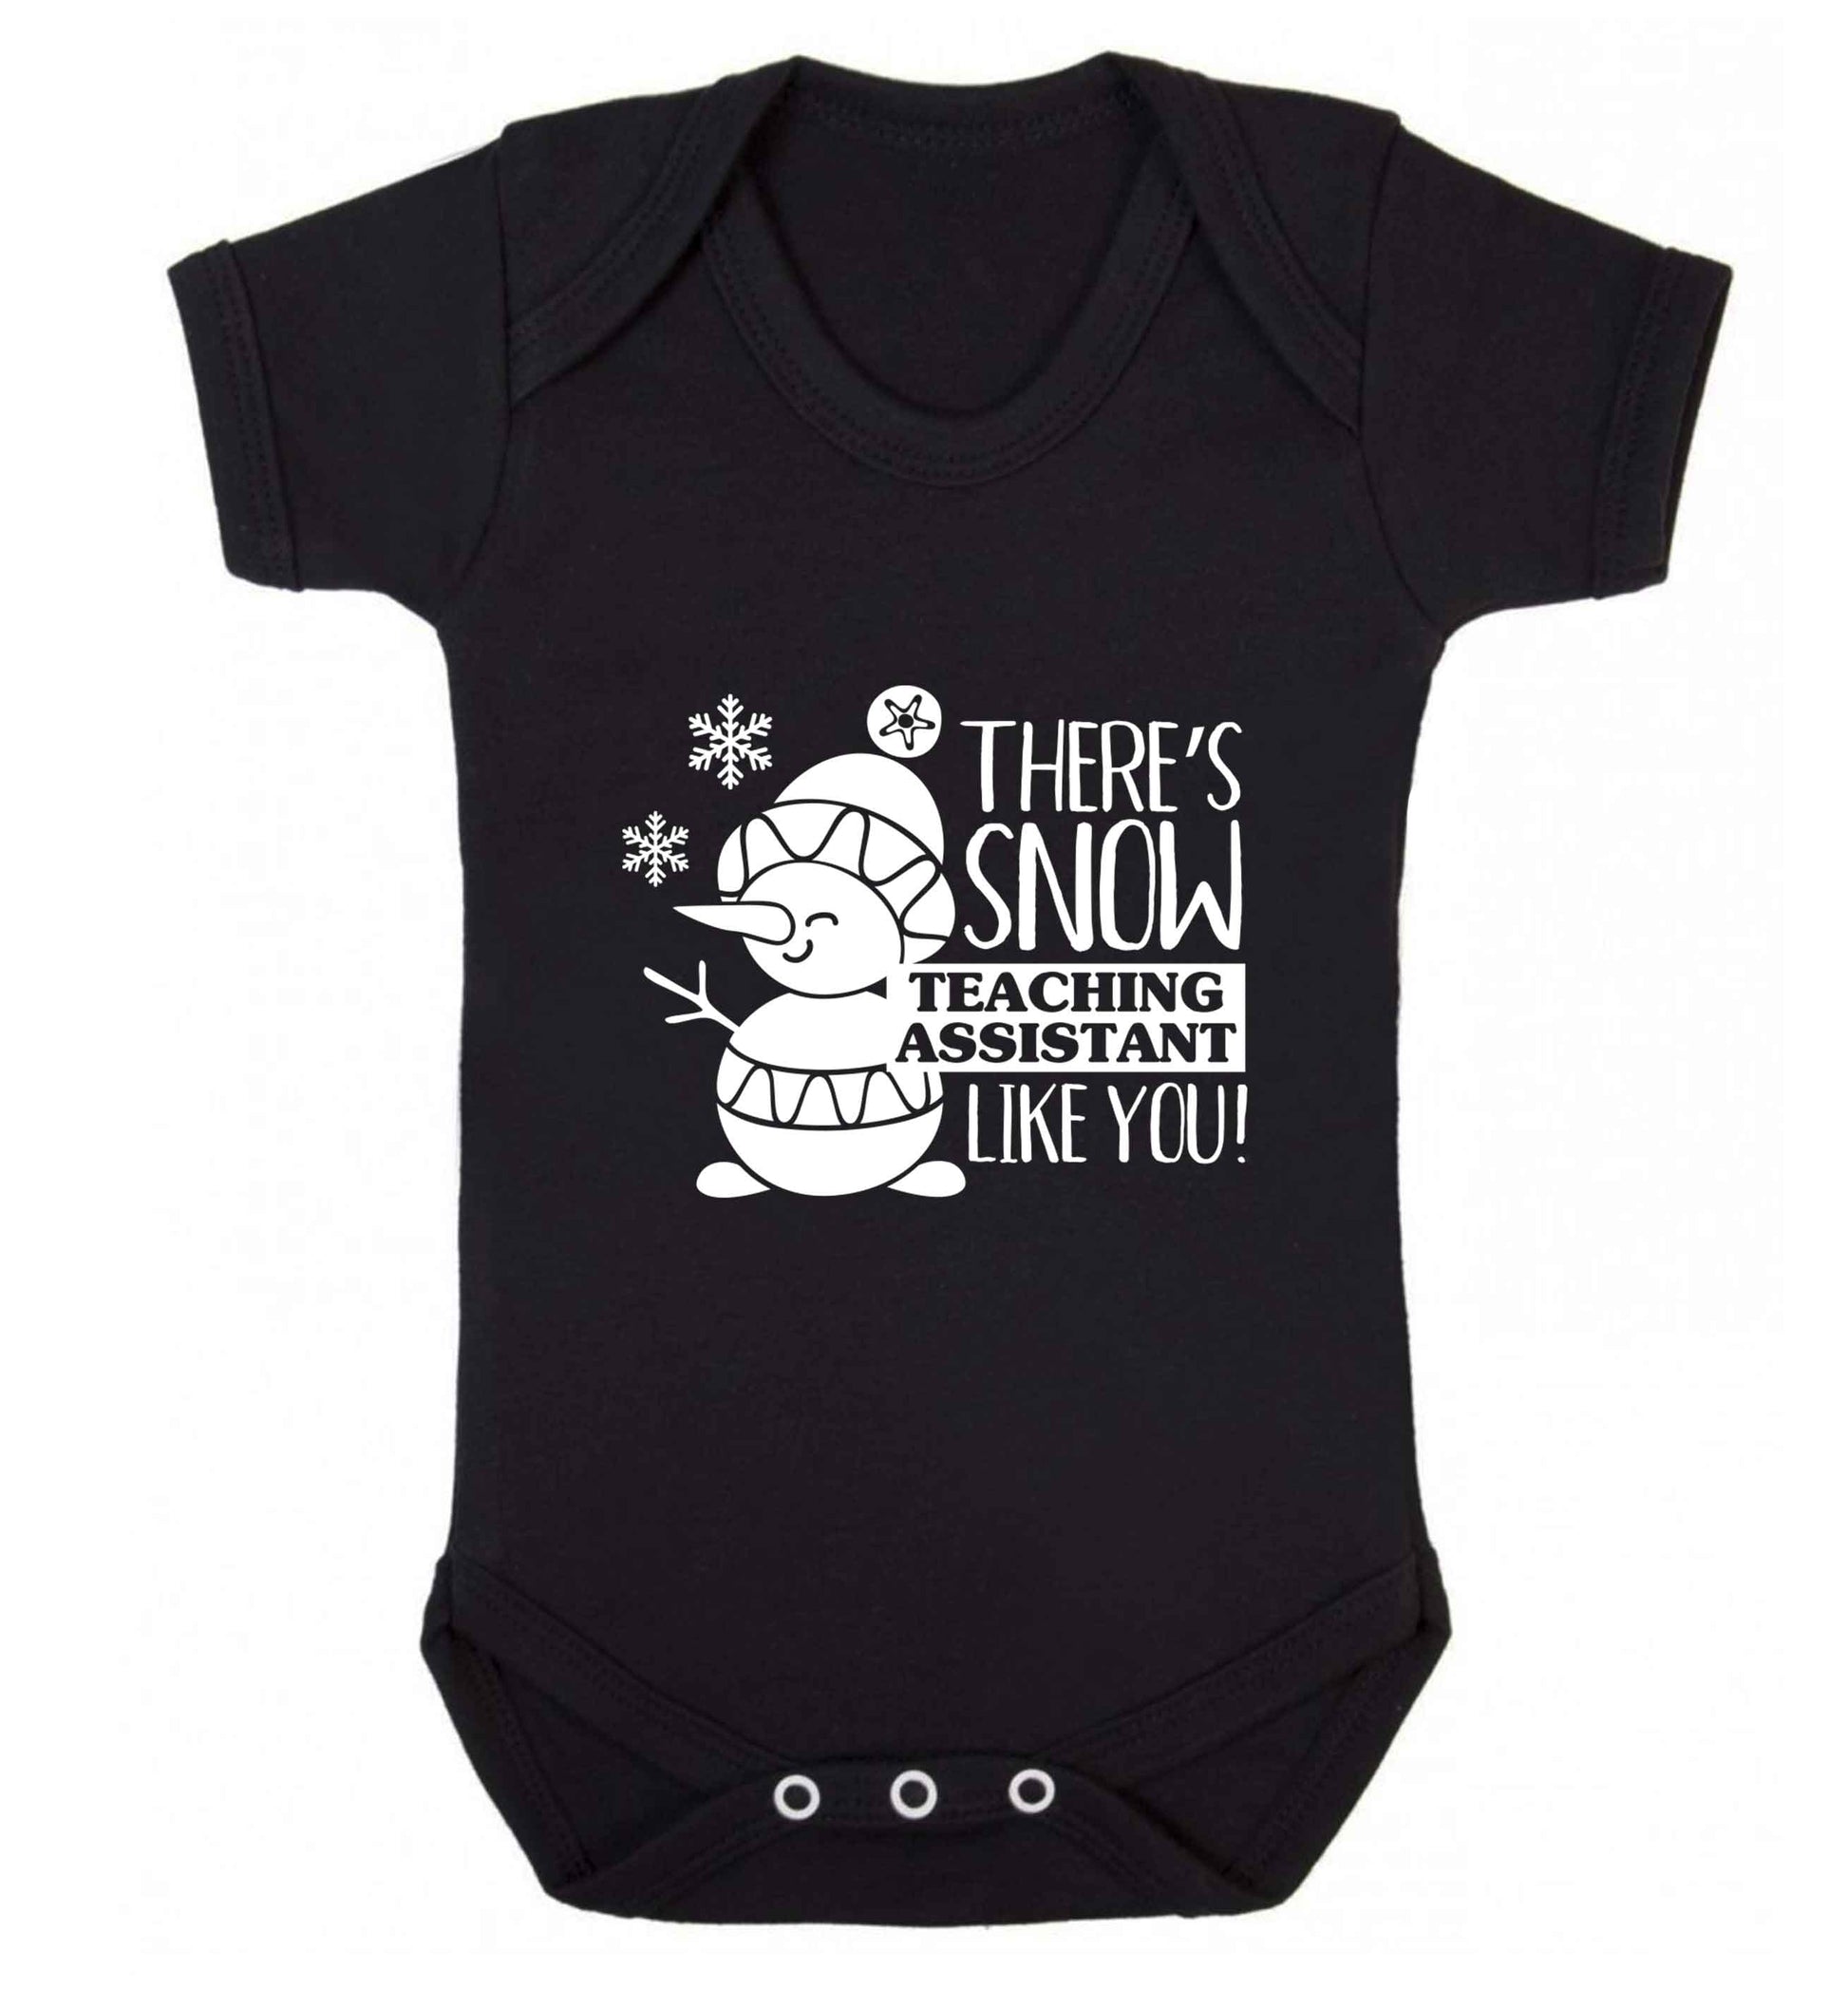 There's snow teaching assistant like you baby vest black 18-24 months